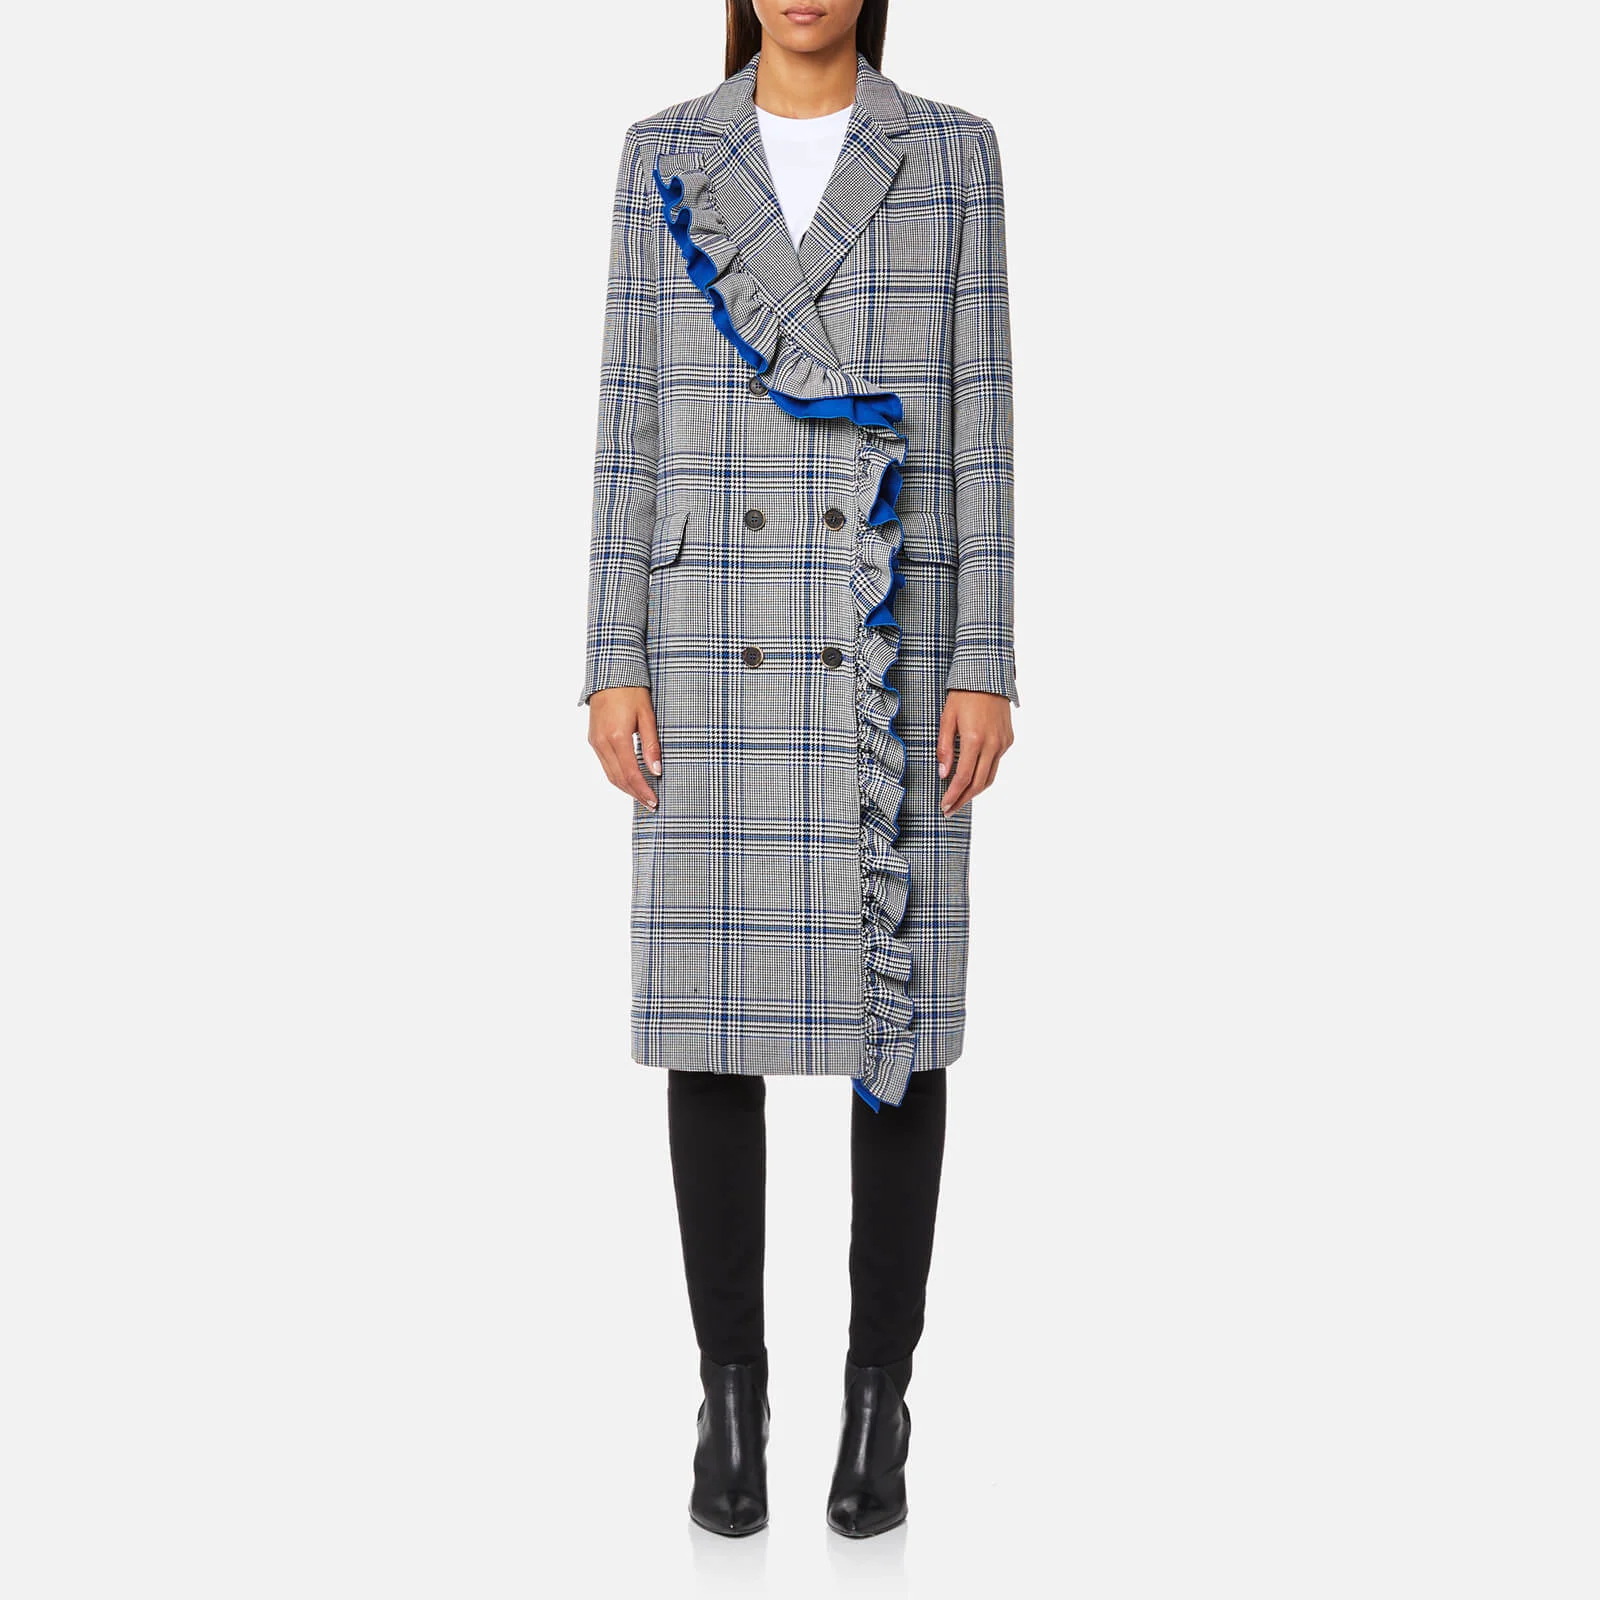 MSGM Women's Checks and Frills Double Breasted Coat - Grey Image 1